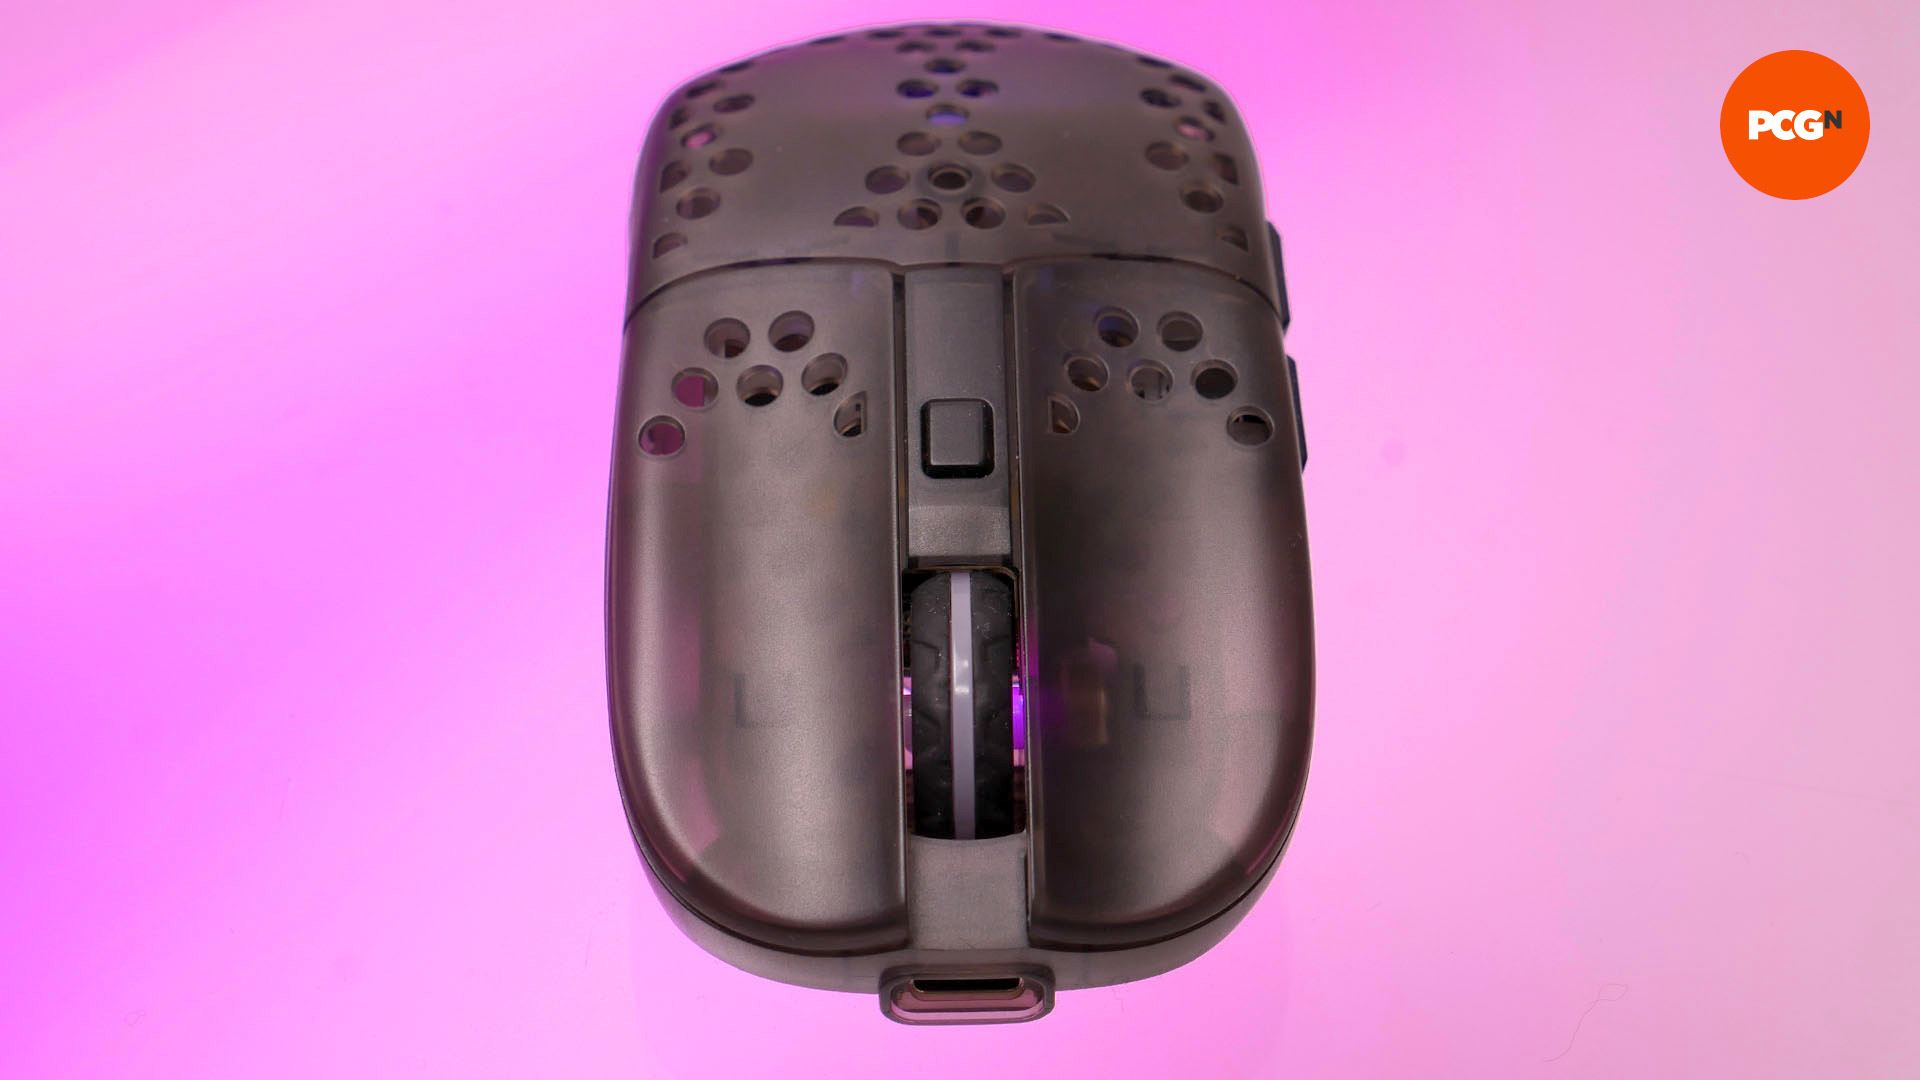 The front of the cherry xtrfy mz1 wireless mouse on a purple background